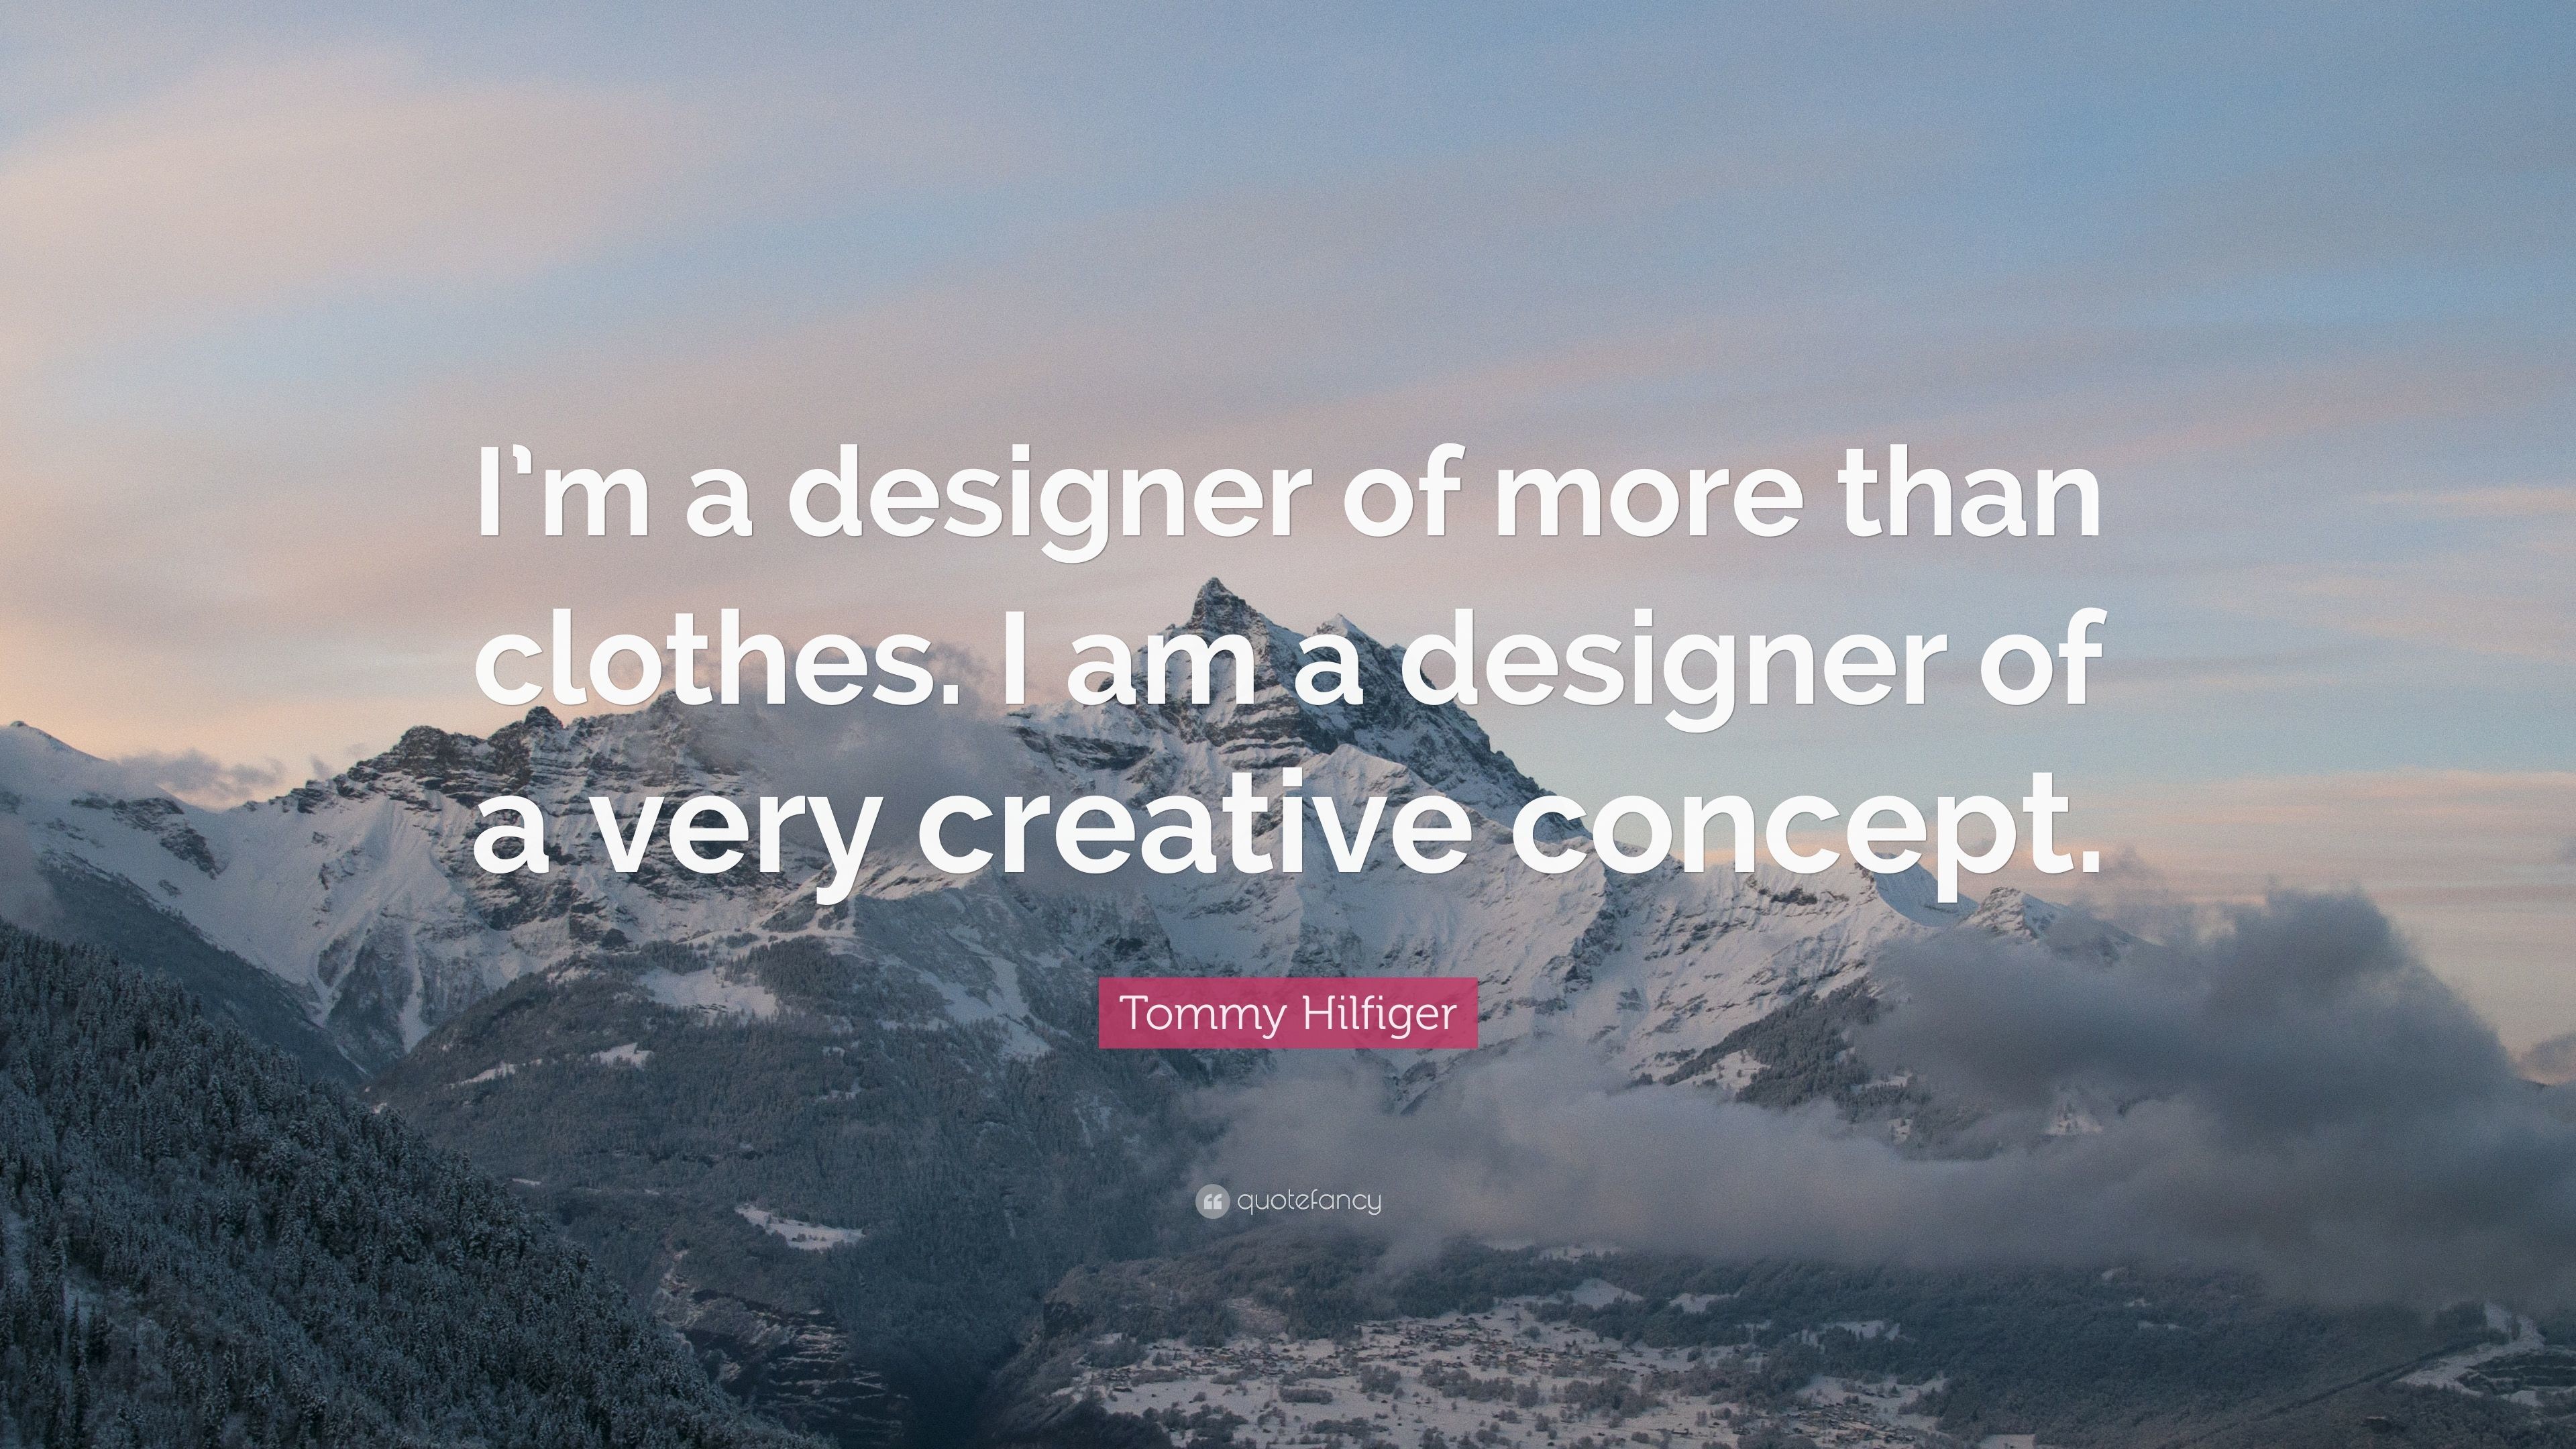 3840x2160 Tommy Hilfiger Quote: “I'm a designer of more than clothes. I